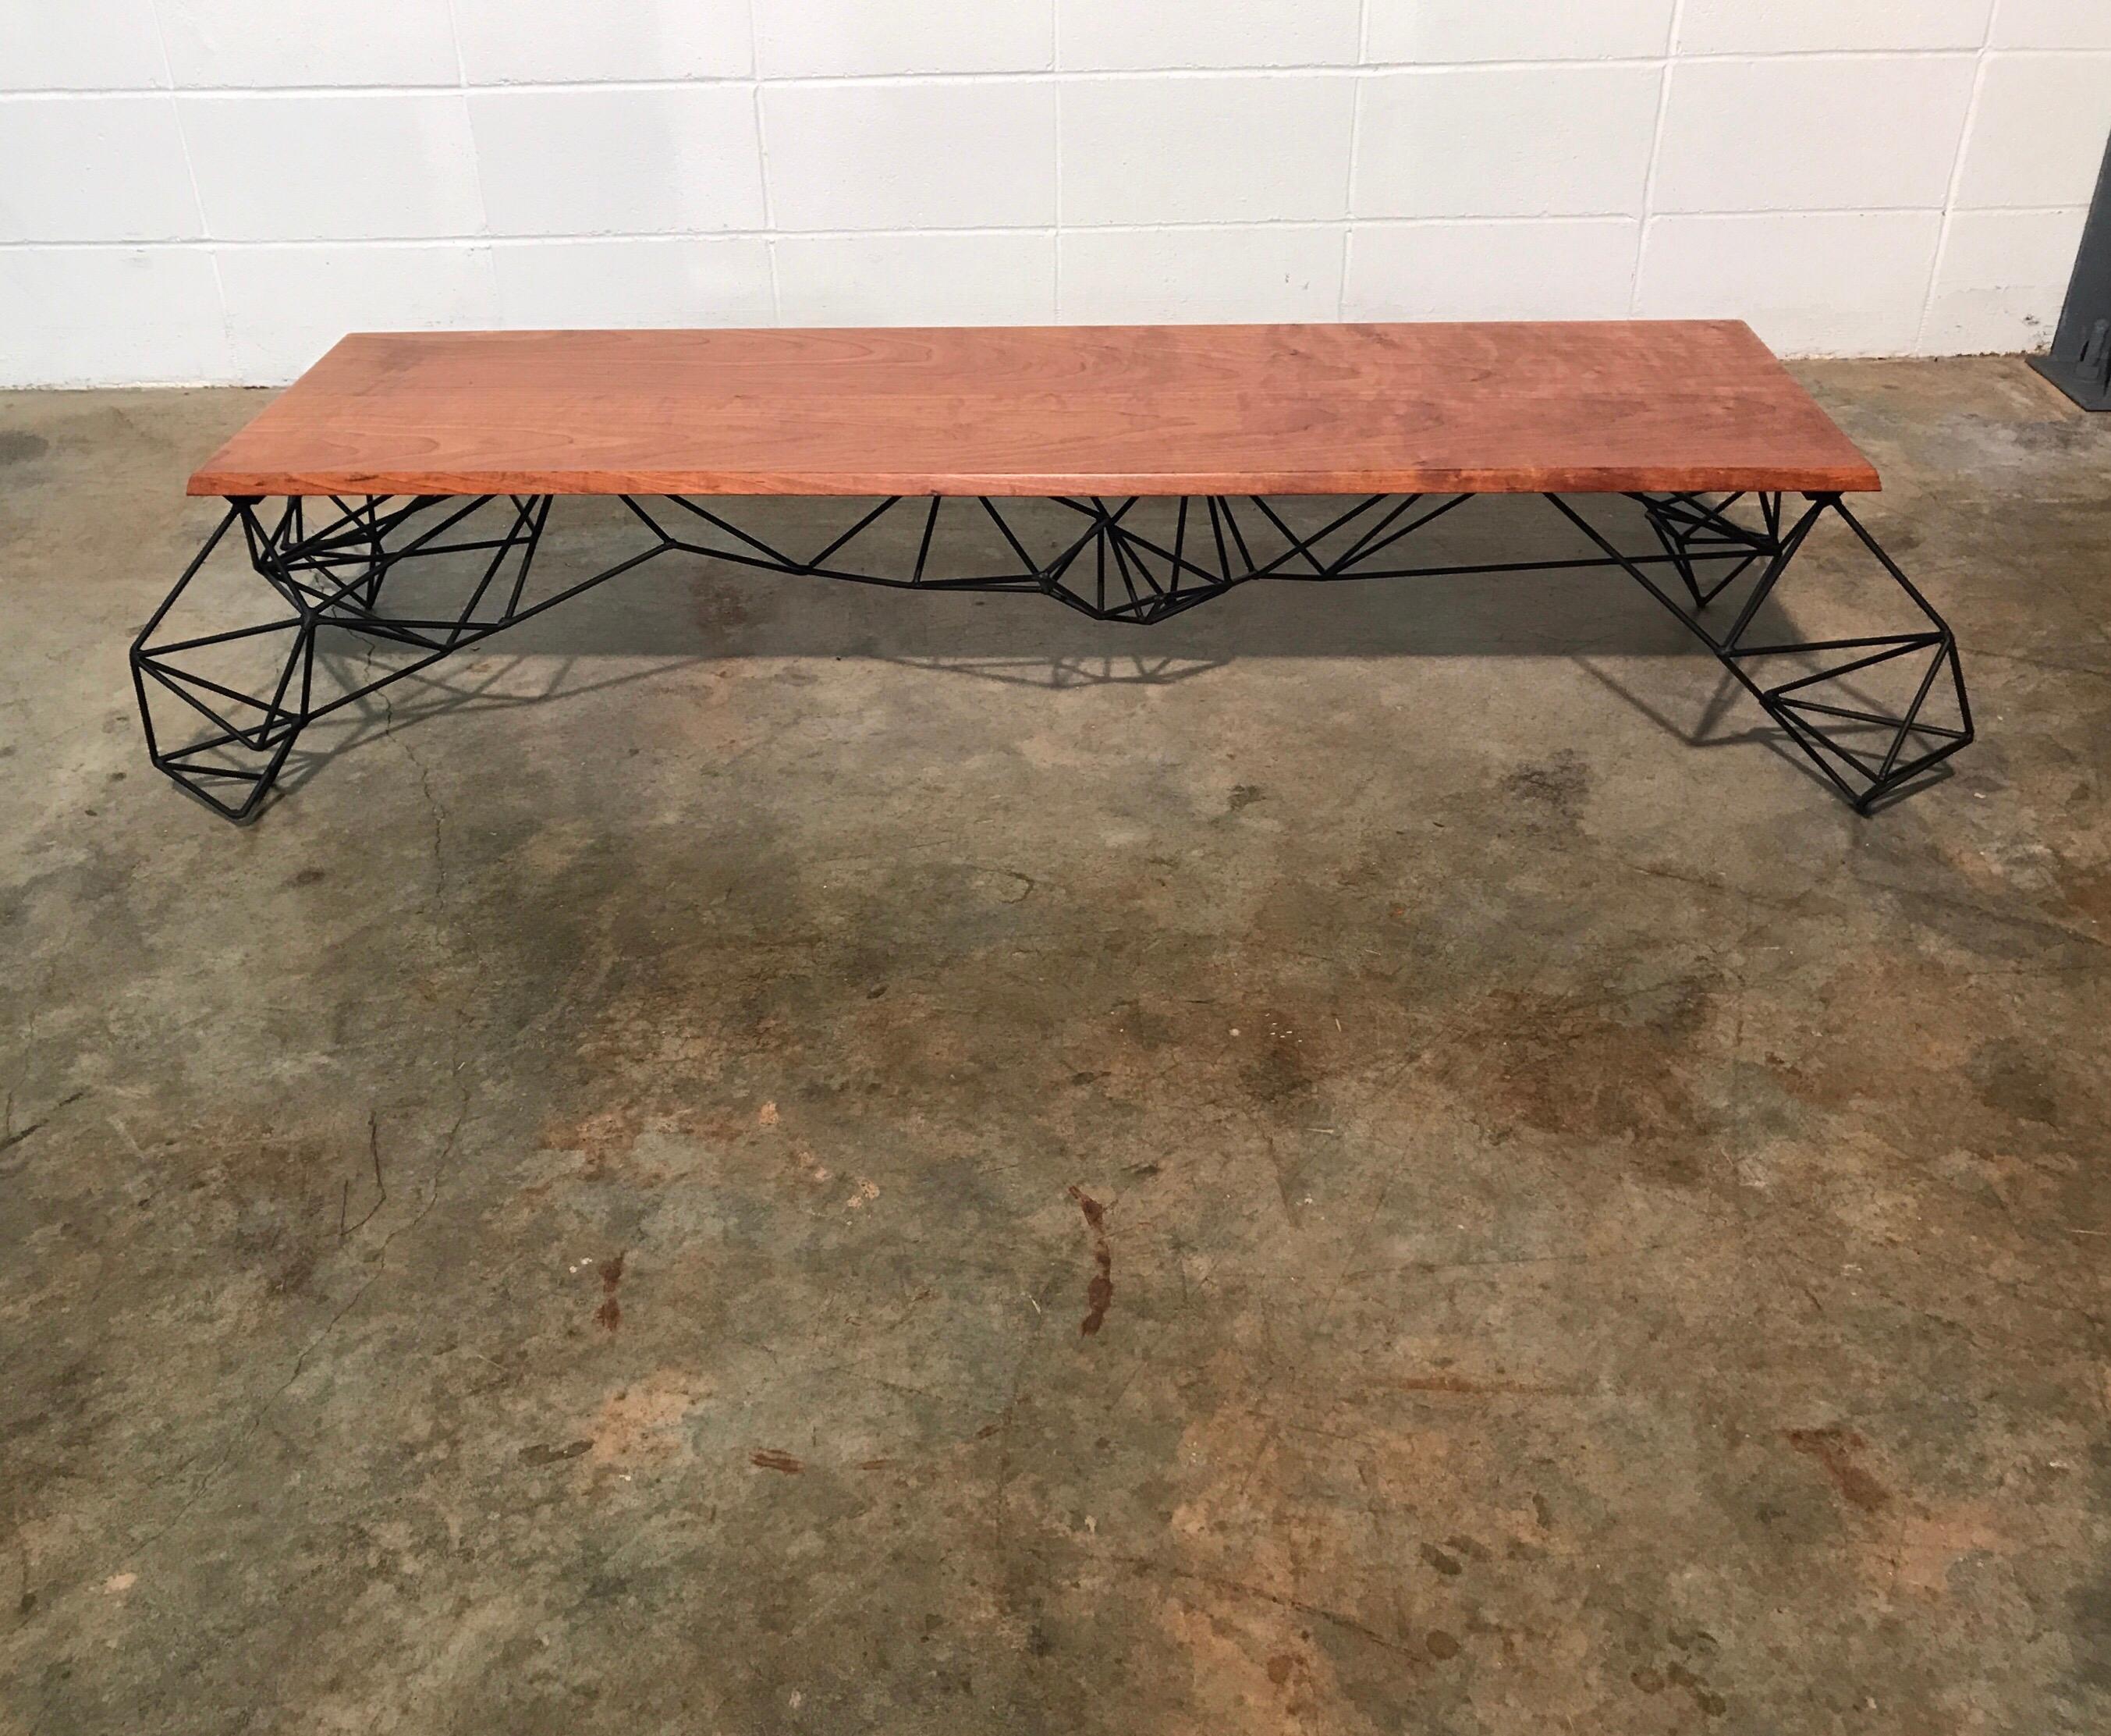 Sculptural modern geometric custom designed and fabricated coffee table. This stunning table has the perfect blend of sleek modernism and beautifully grained hardwood. It was designed and fabricated by Joshua Shorey. Joshua has a MFA in Sculpture